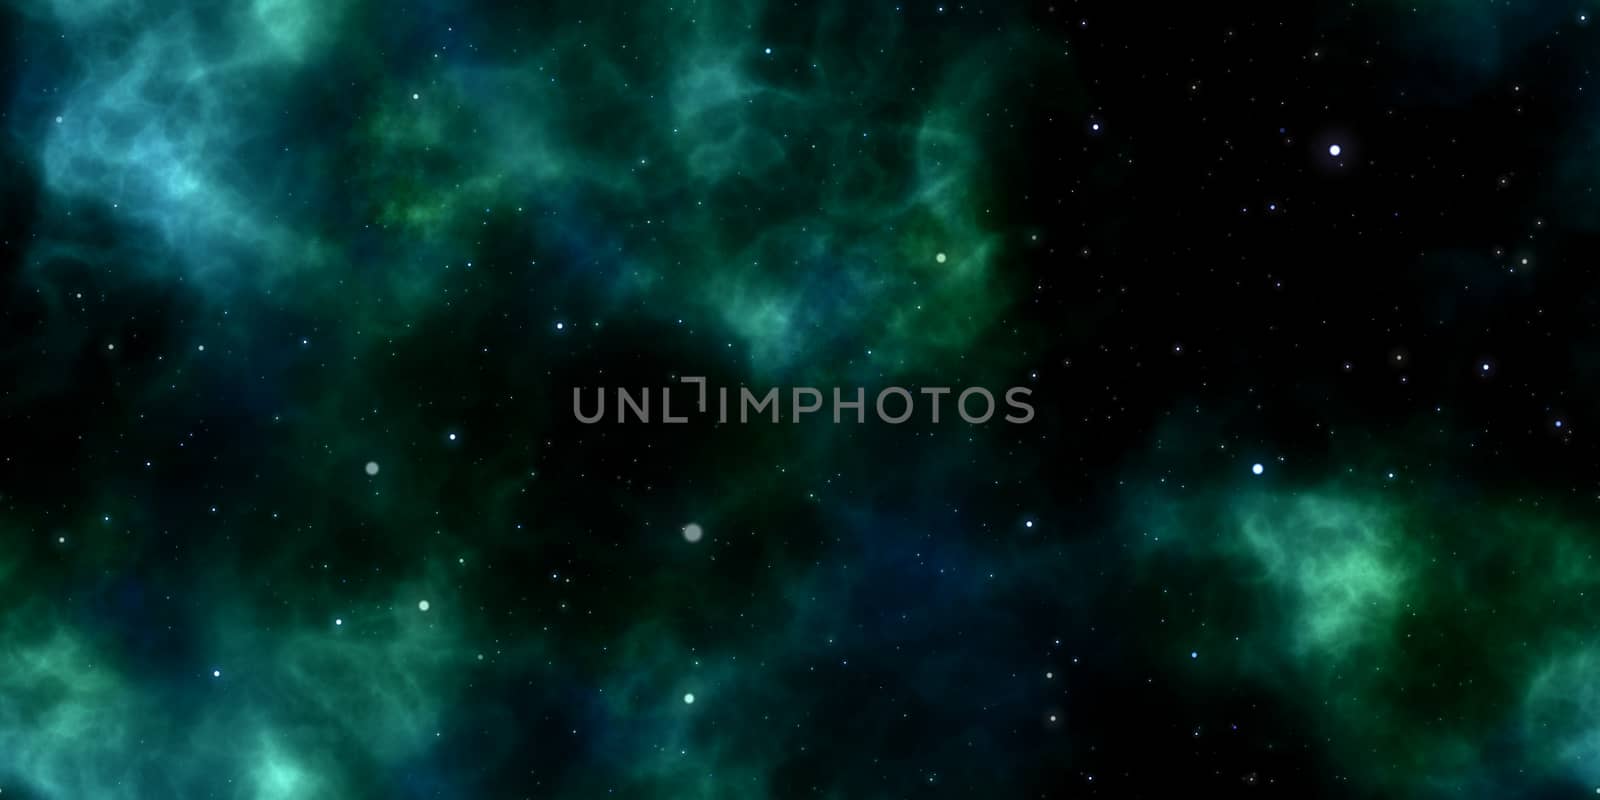 Deep Sea Blue Starry Milky Way Clouds on Night Sky Galaxy Background. Abstract Cosmos Infinity Texture. 3D Rendering. 3D Illustration. by sanches812